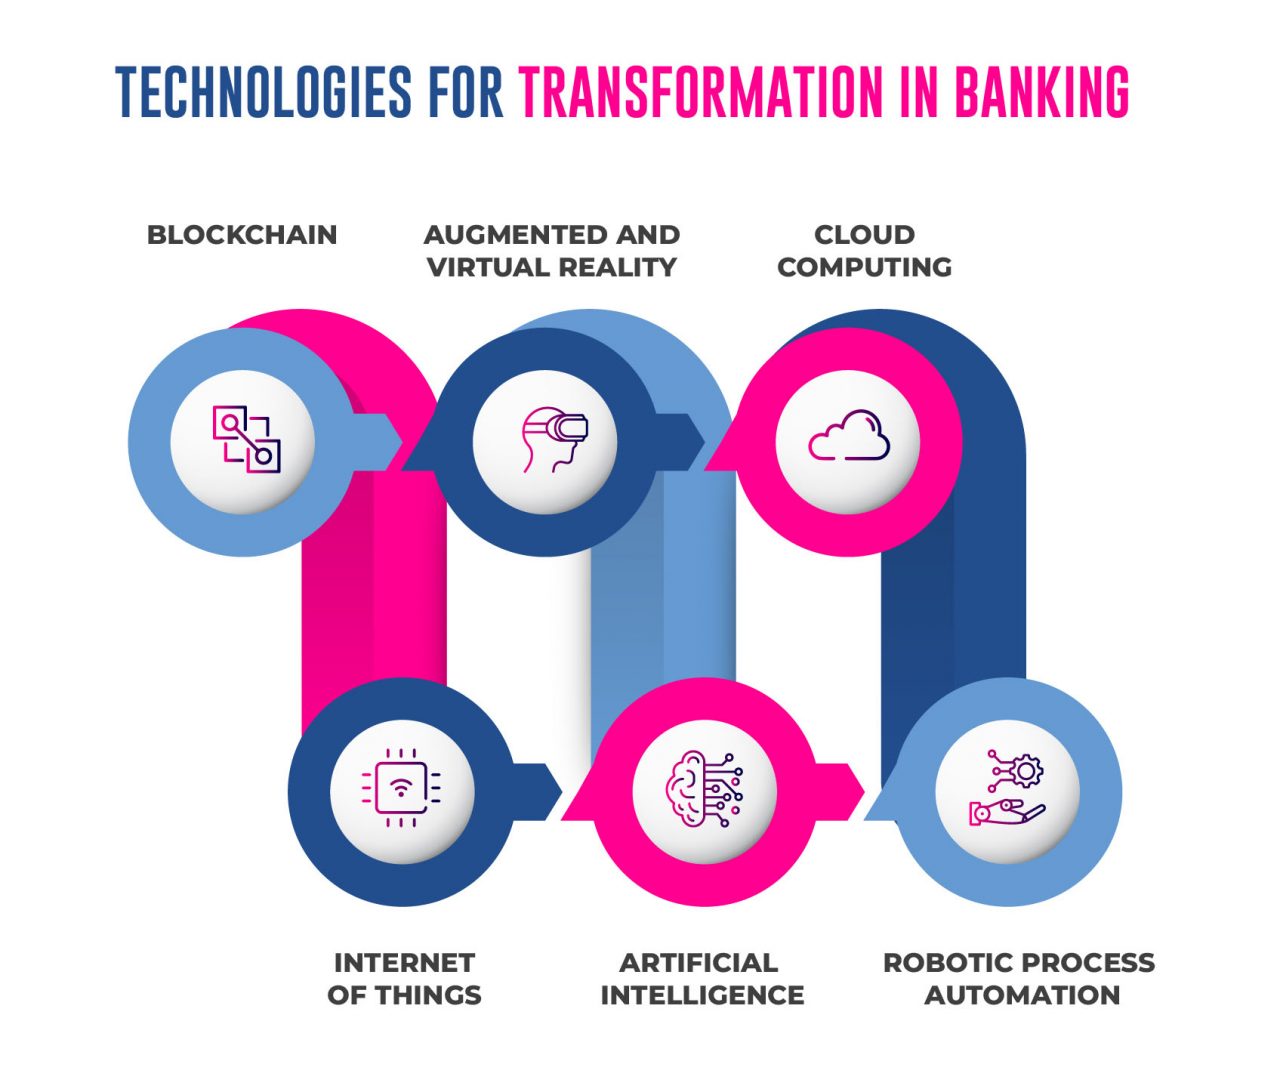 Banking Digital Transformation - Facts, Advantages, and Trends